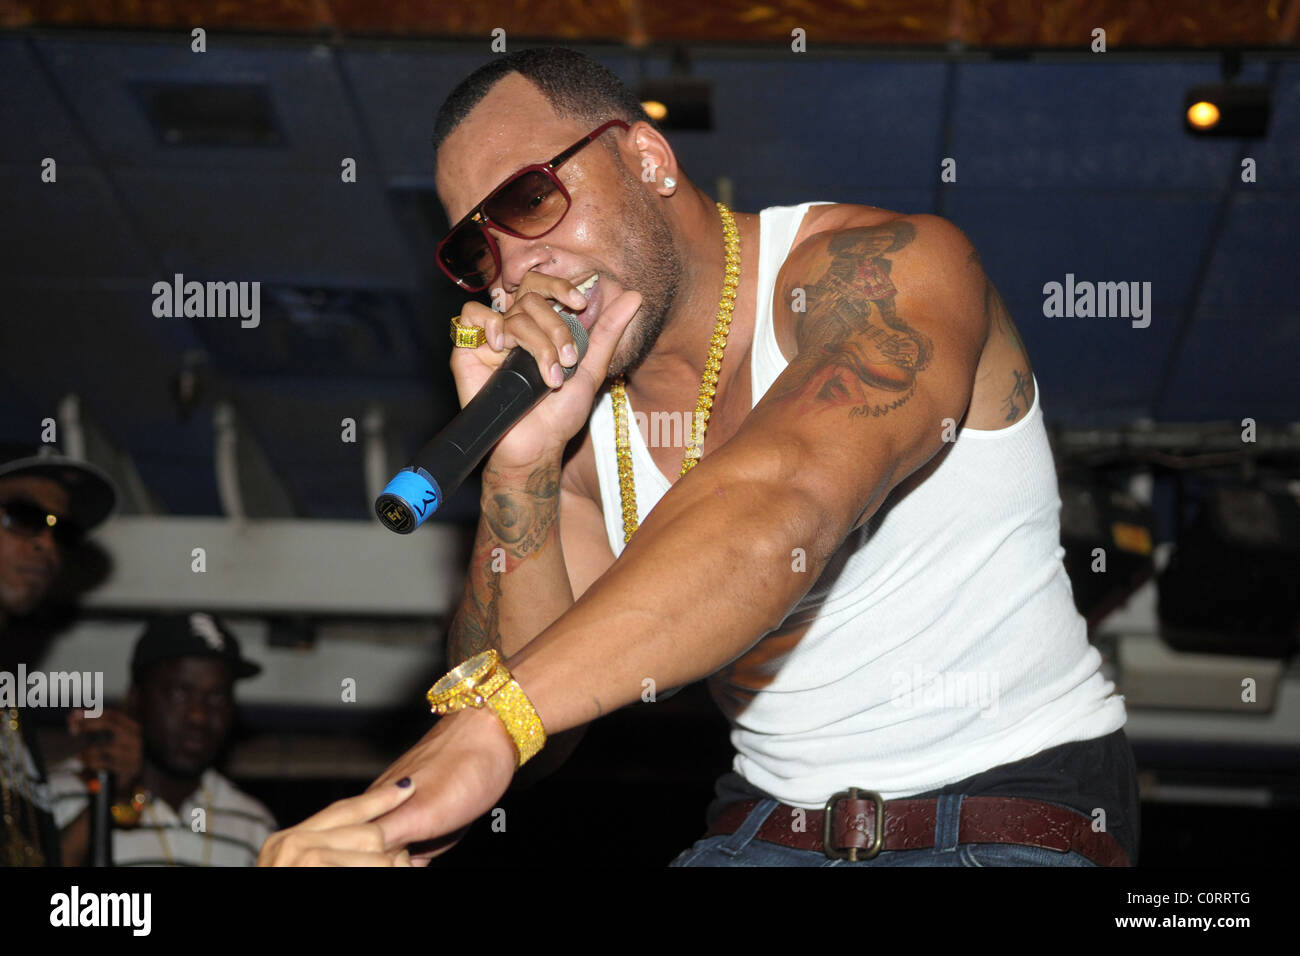 Flo-Rida performing at 'Power 96 Presents: The World's Largest Office Christmas Party' at Cafe Iguana Pines. Davie, Florida - Stock Photo